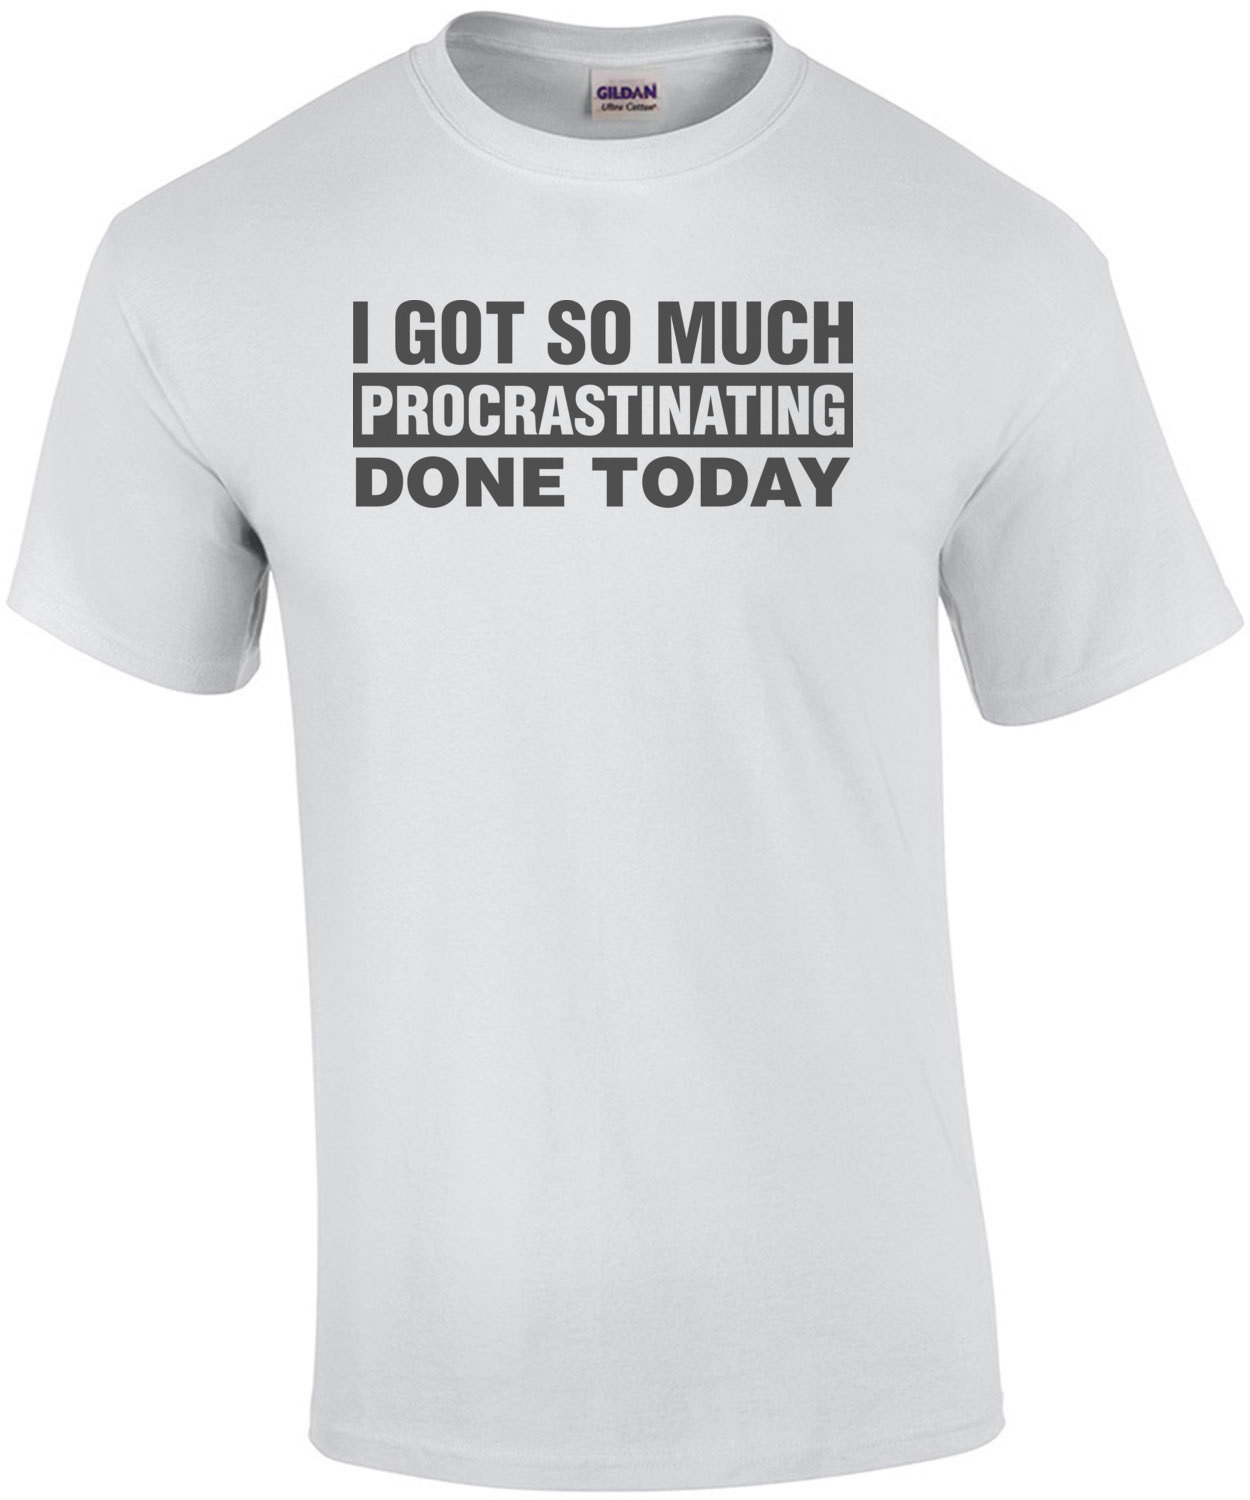 I Got So Much Procrastinating Done Today Tee